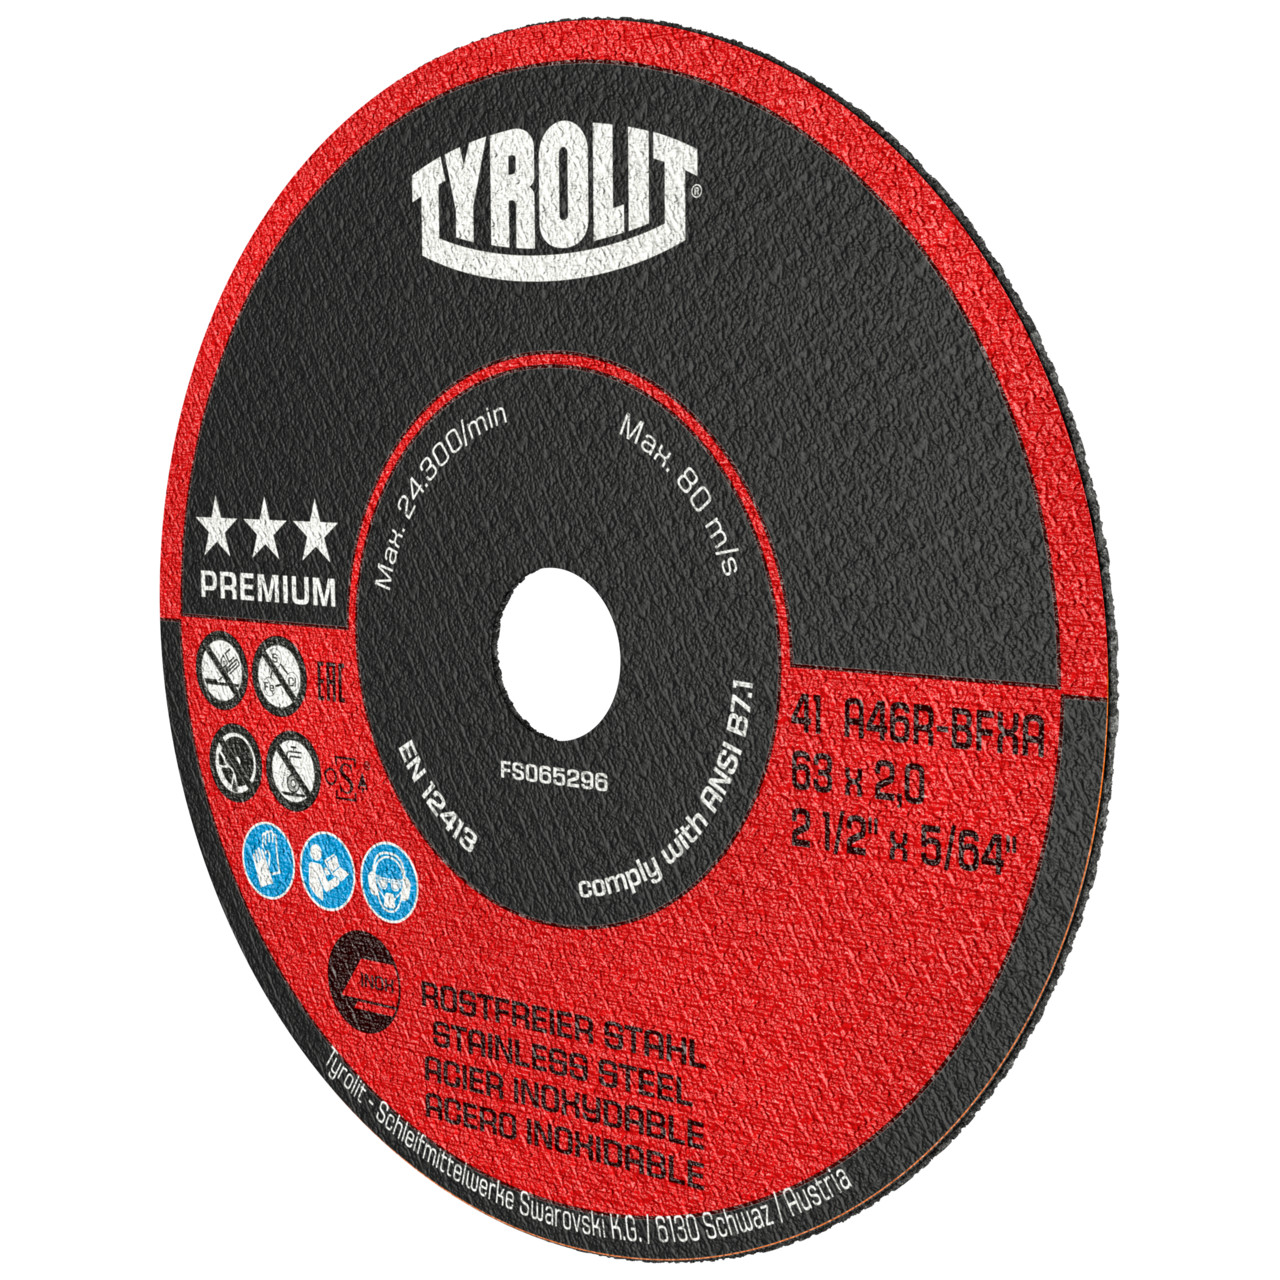 Tyrolit Cutting discs DxDxH 50x2x6 For stainless steel, shape: 41 - straight version, Art. 323970